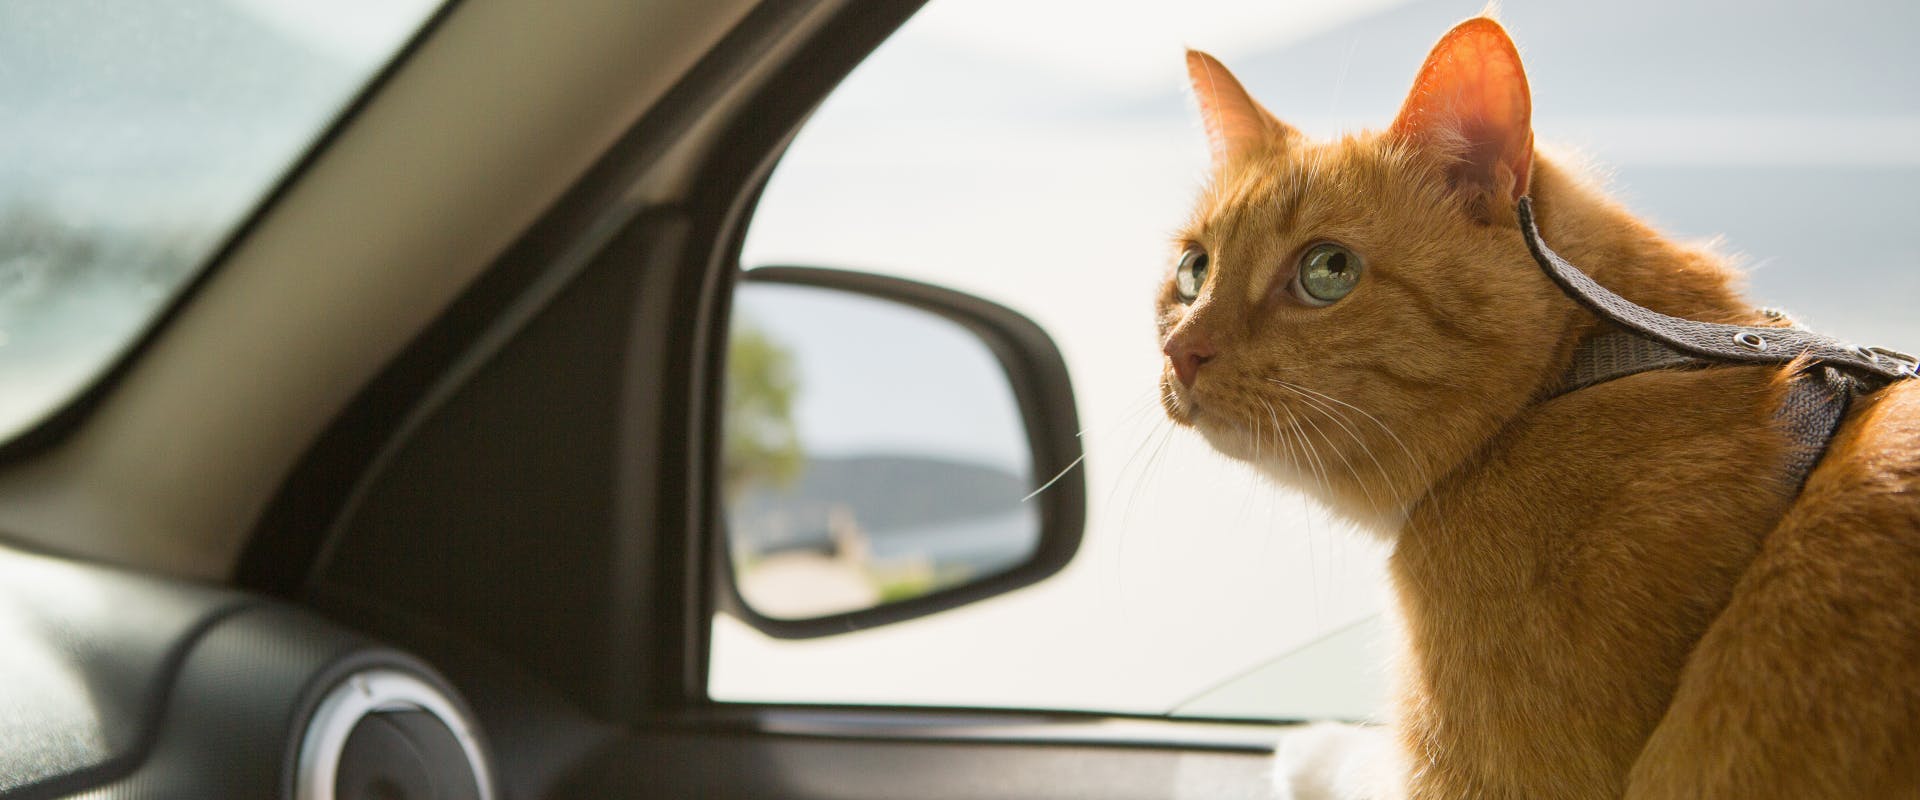 ginger cat with a leash sitting in a car